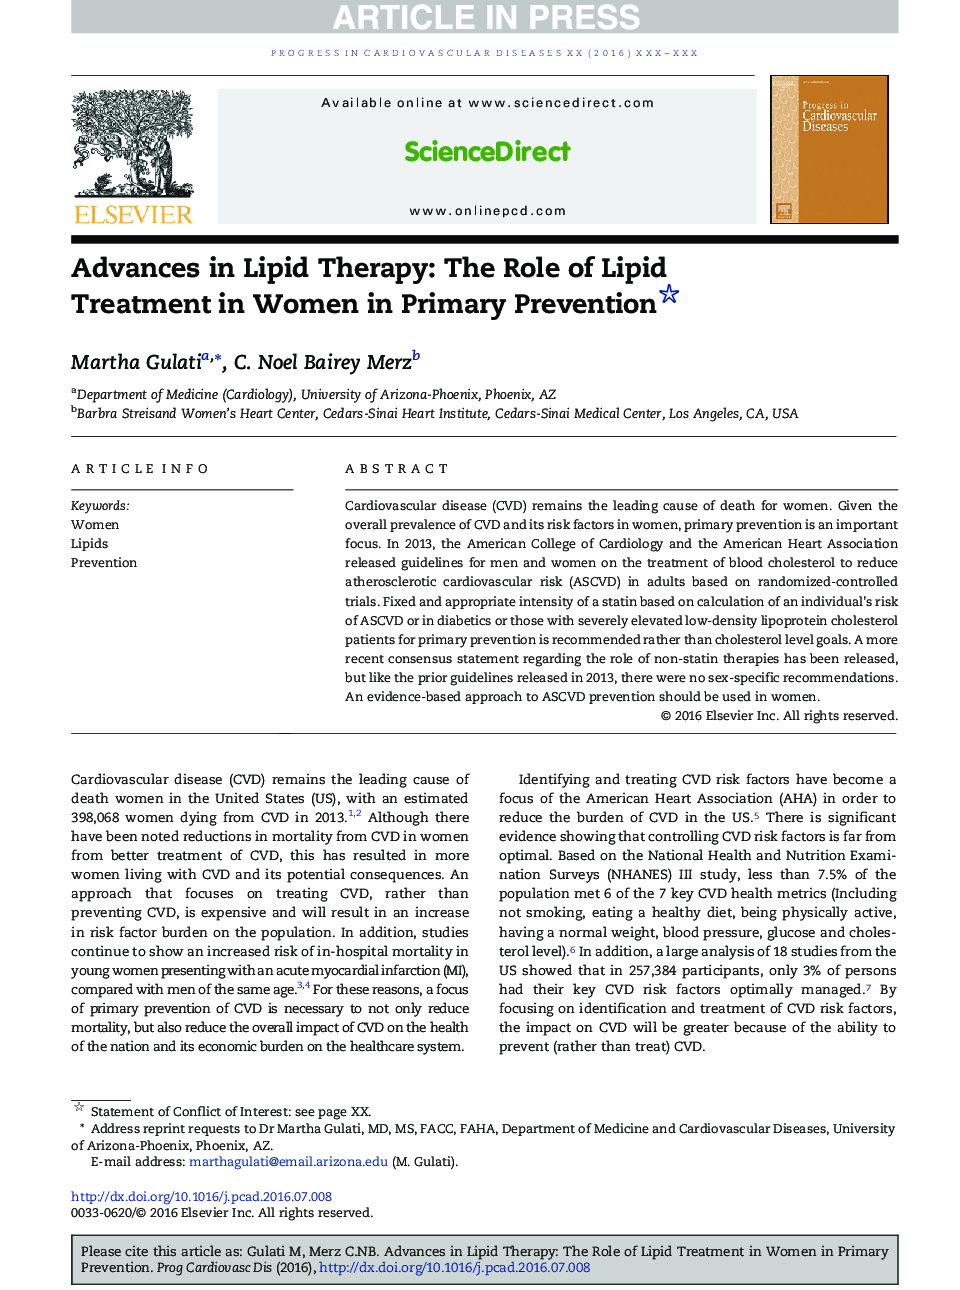 Advances in Lipid Therapy: The Role of Lipid Treatment in Women in Primary Prevention